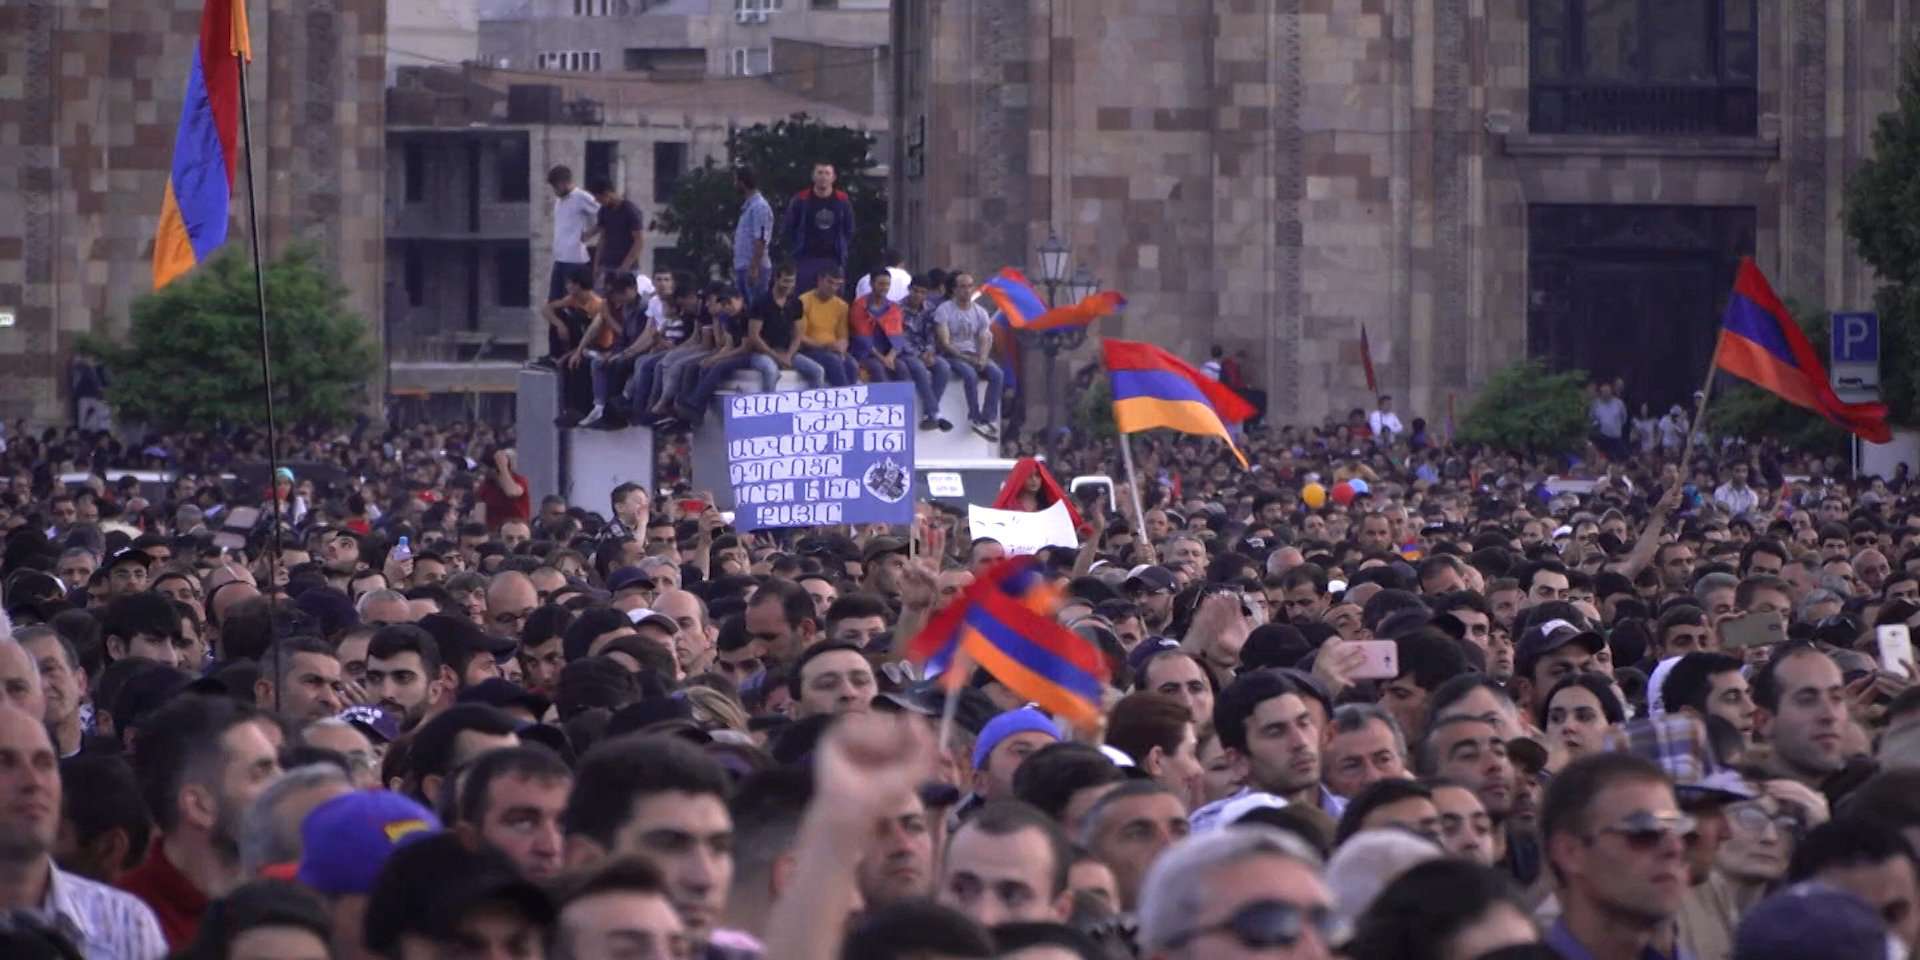 Taboola Ad Example 54236 - A Year After Armenia's 250,000-person Revolution, Prime Minister Nikol Pashinyan Explains What Comes Next For The Country